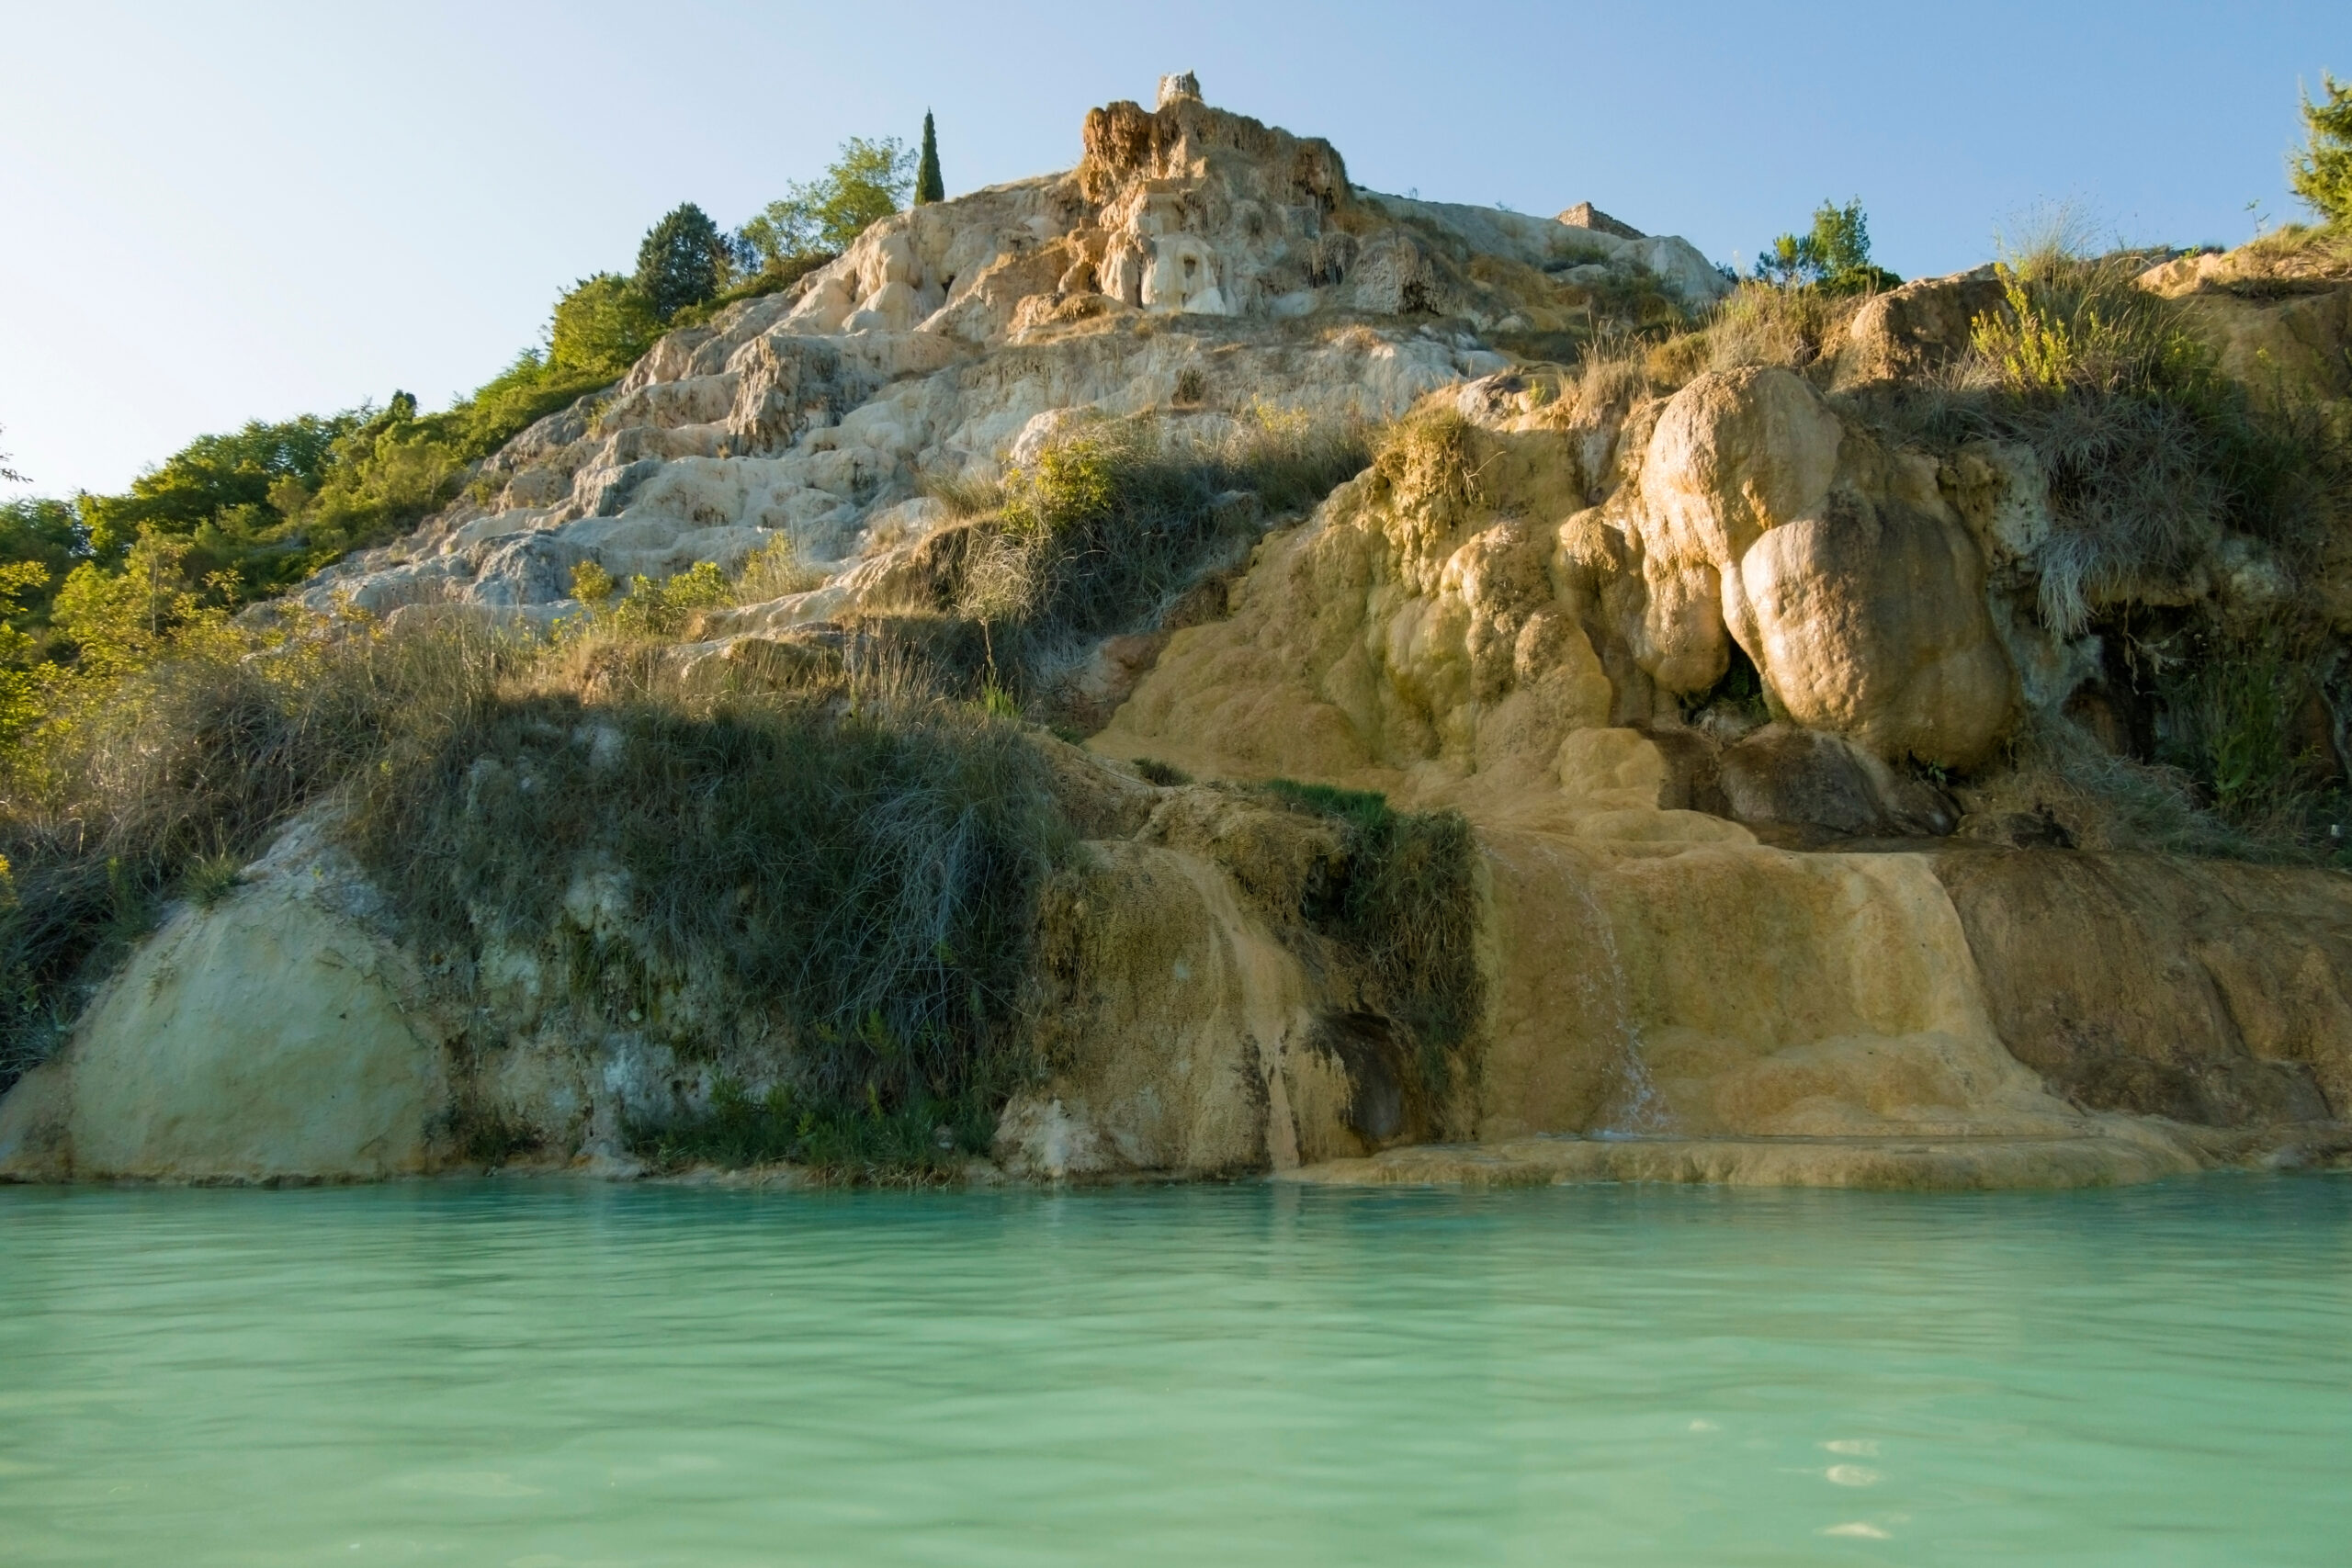 View of the natural hot springs at Parco Dei Mulini with a sandstone cliff face and jade green mineral rich waters 